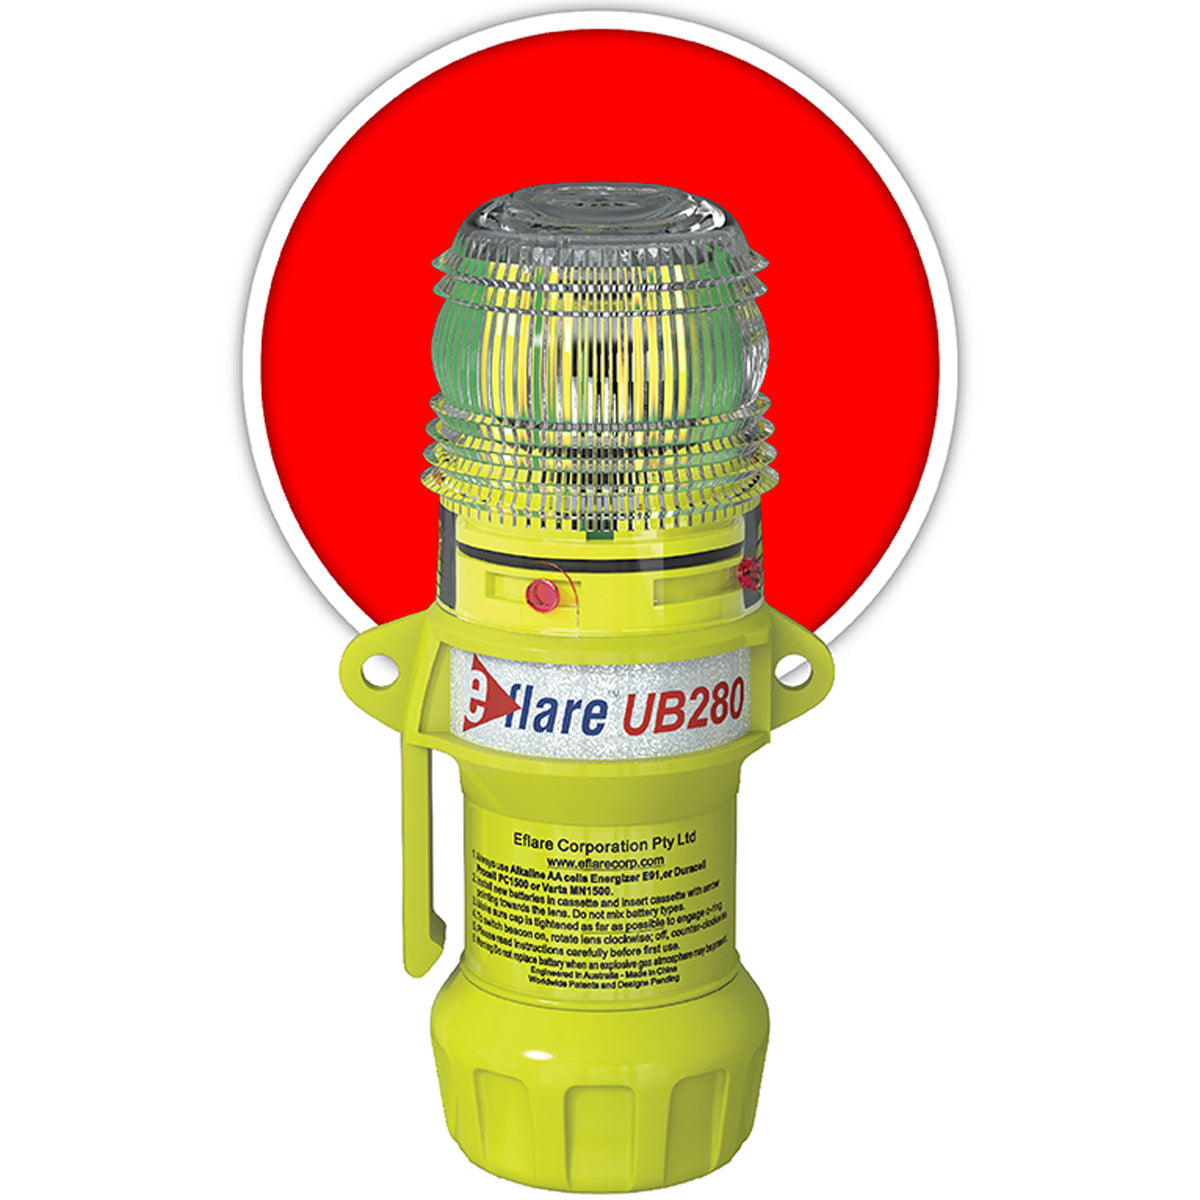 E-flare 939-UB280-R 6" Safety & Emergency Beacon - Flashing / Steady-On Red